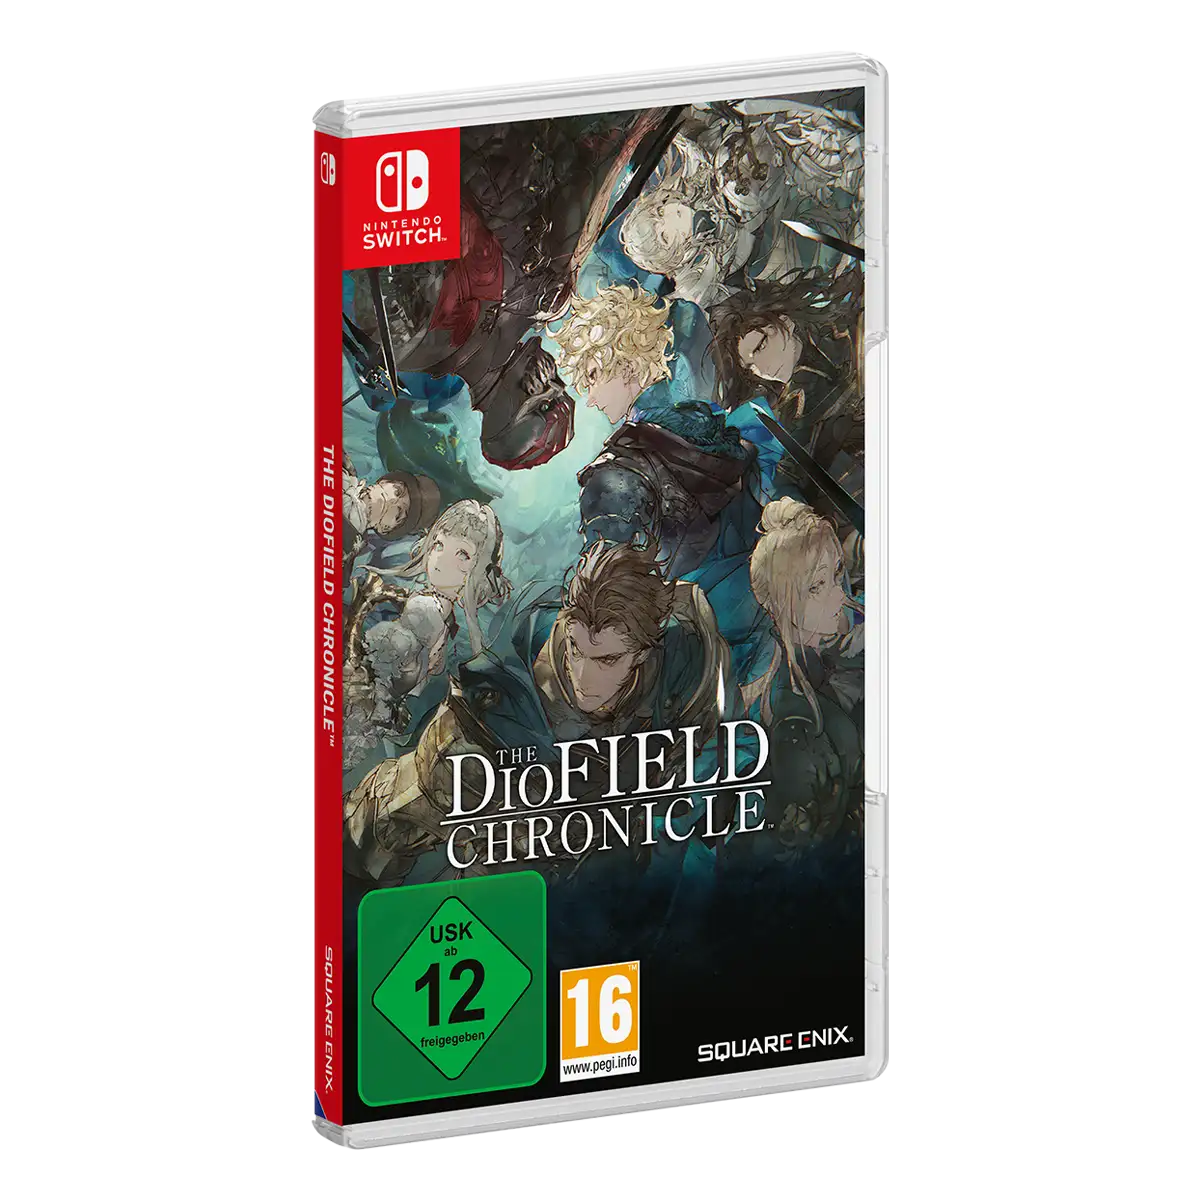 The DioField Chronicle (Switch) Image 2